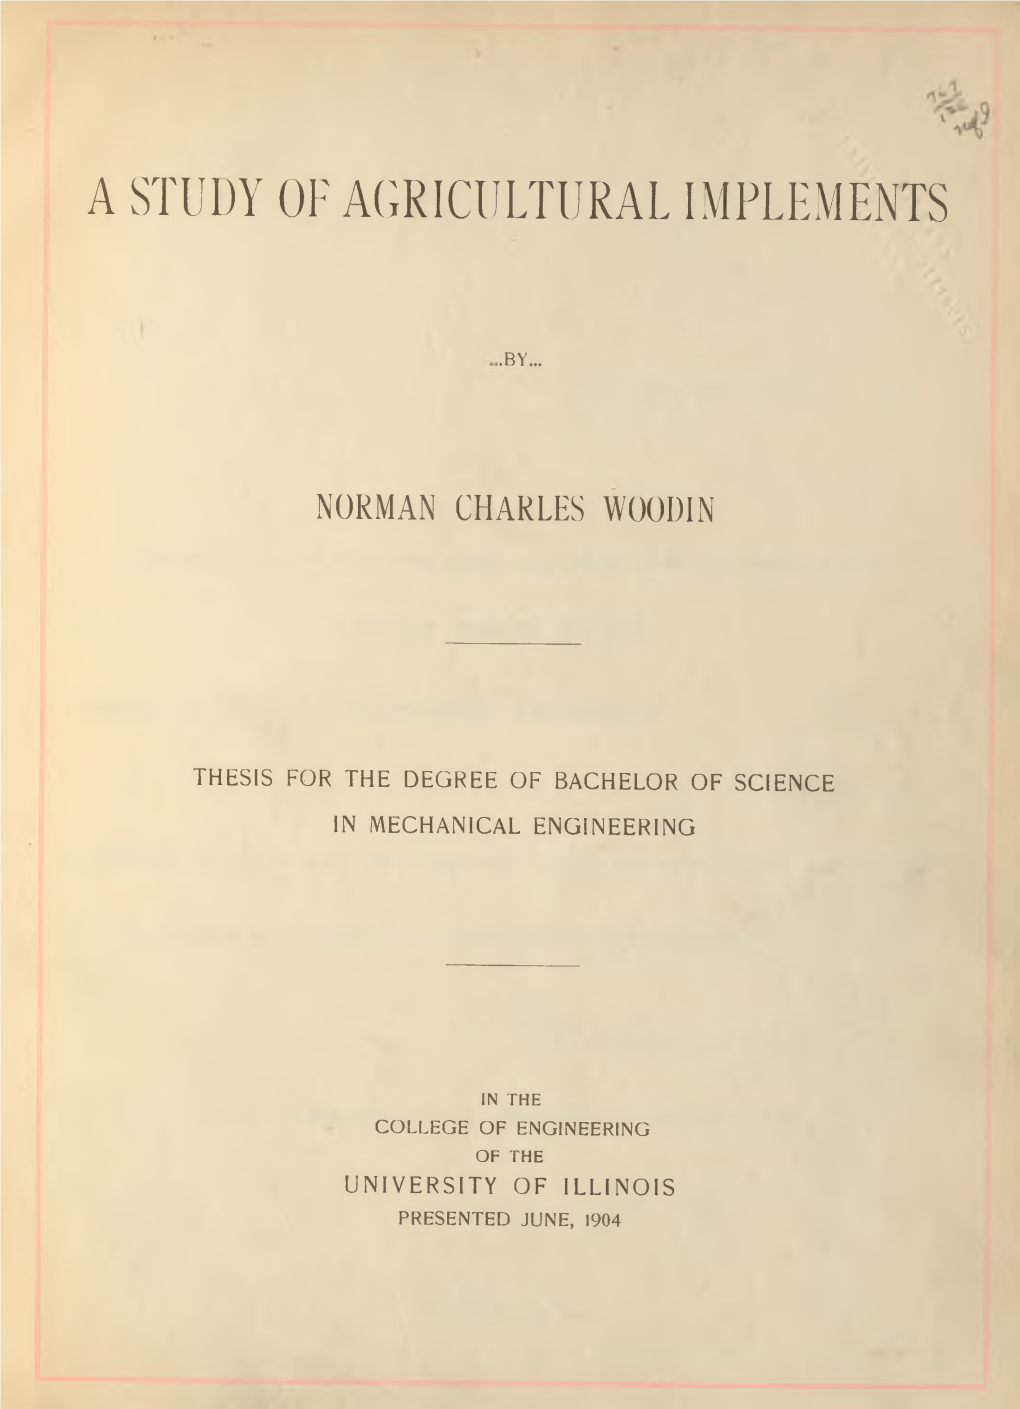 A Study of Agricultural Implements